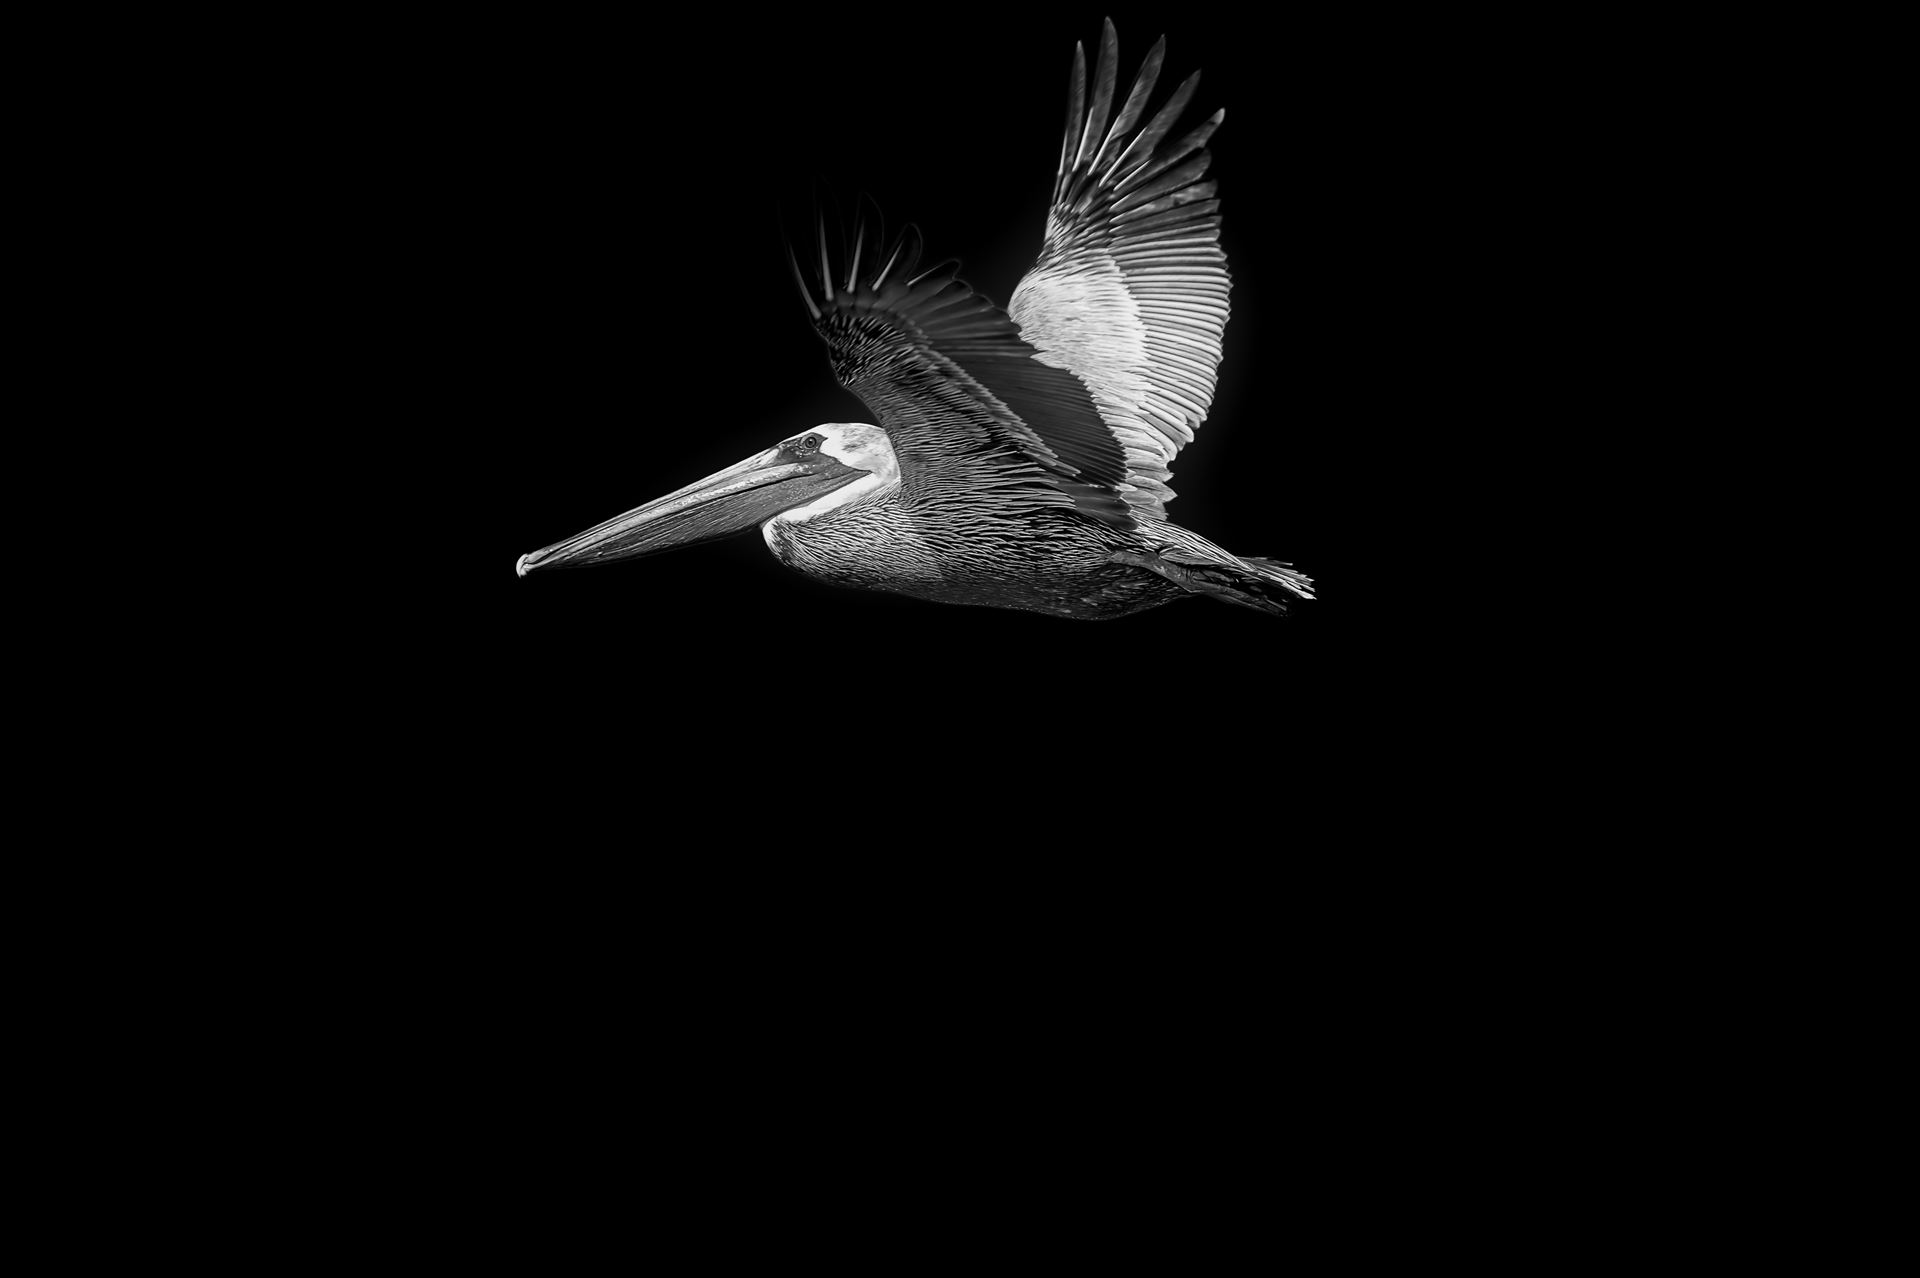 brown pelican - Black & white photo of brown pelican in flight by Terry Kelly Photography